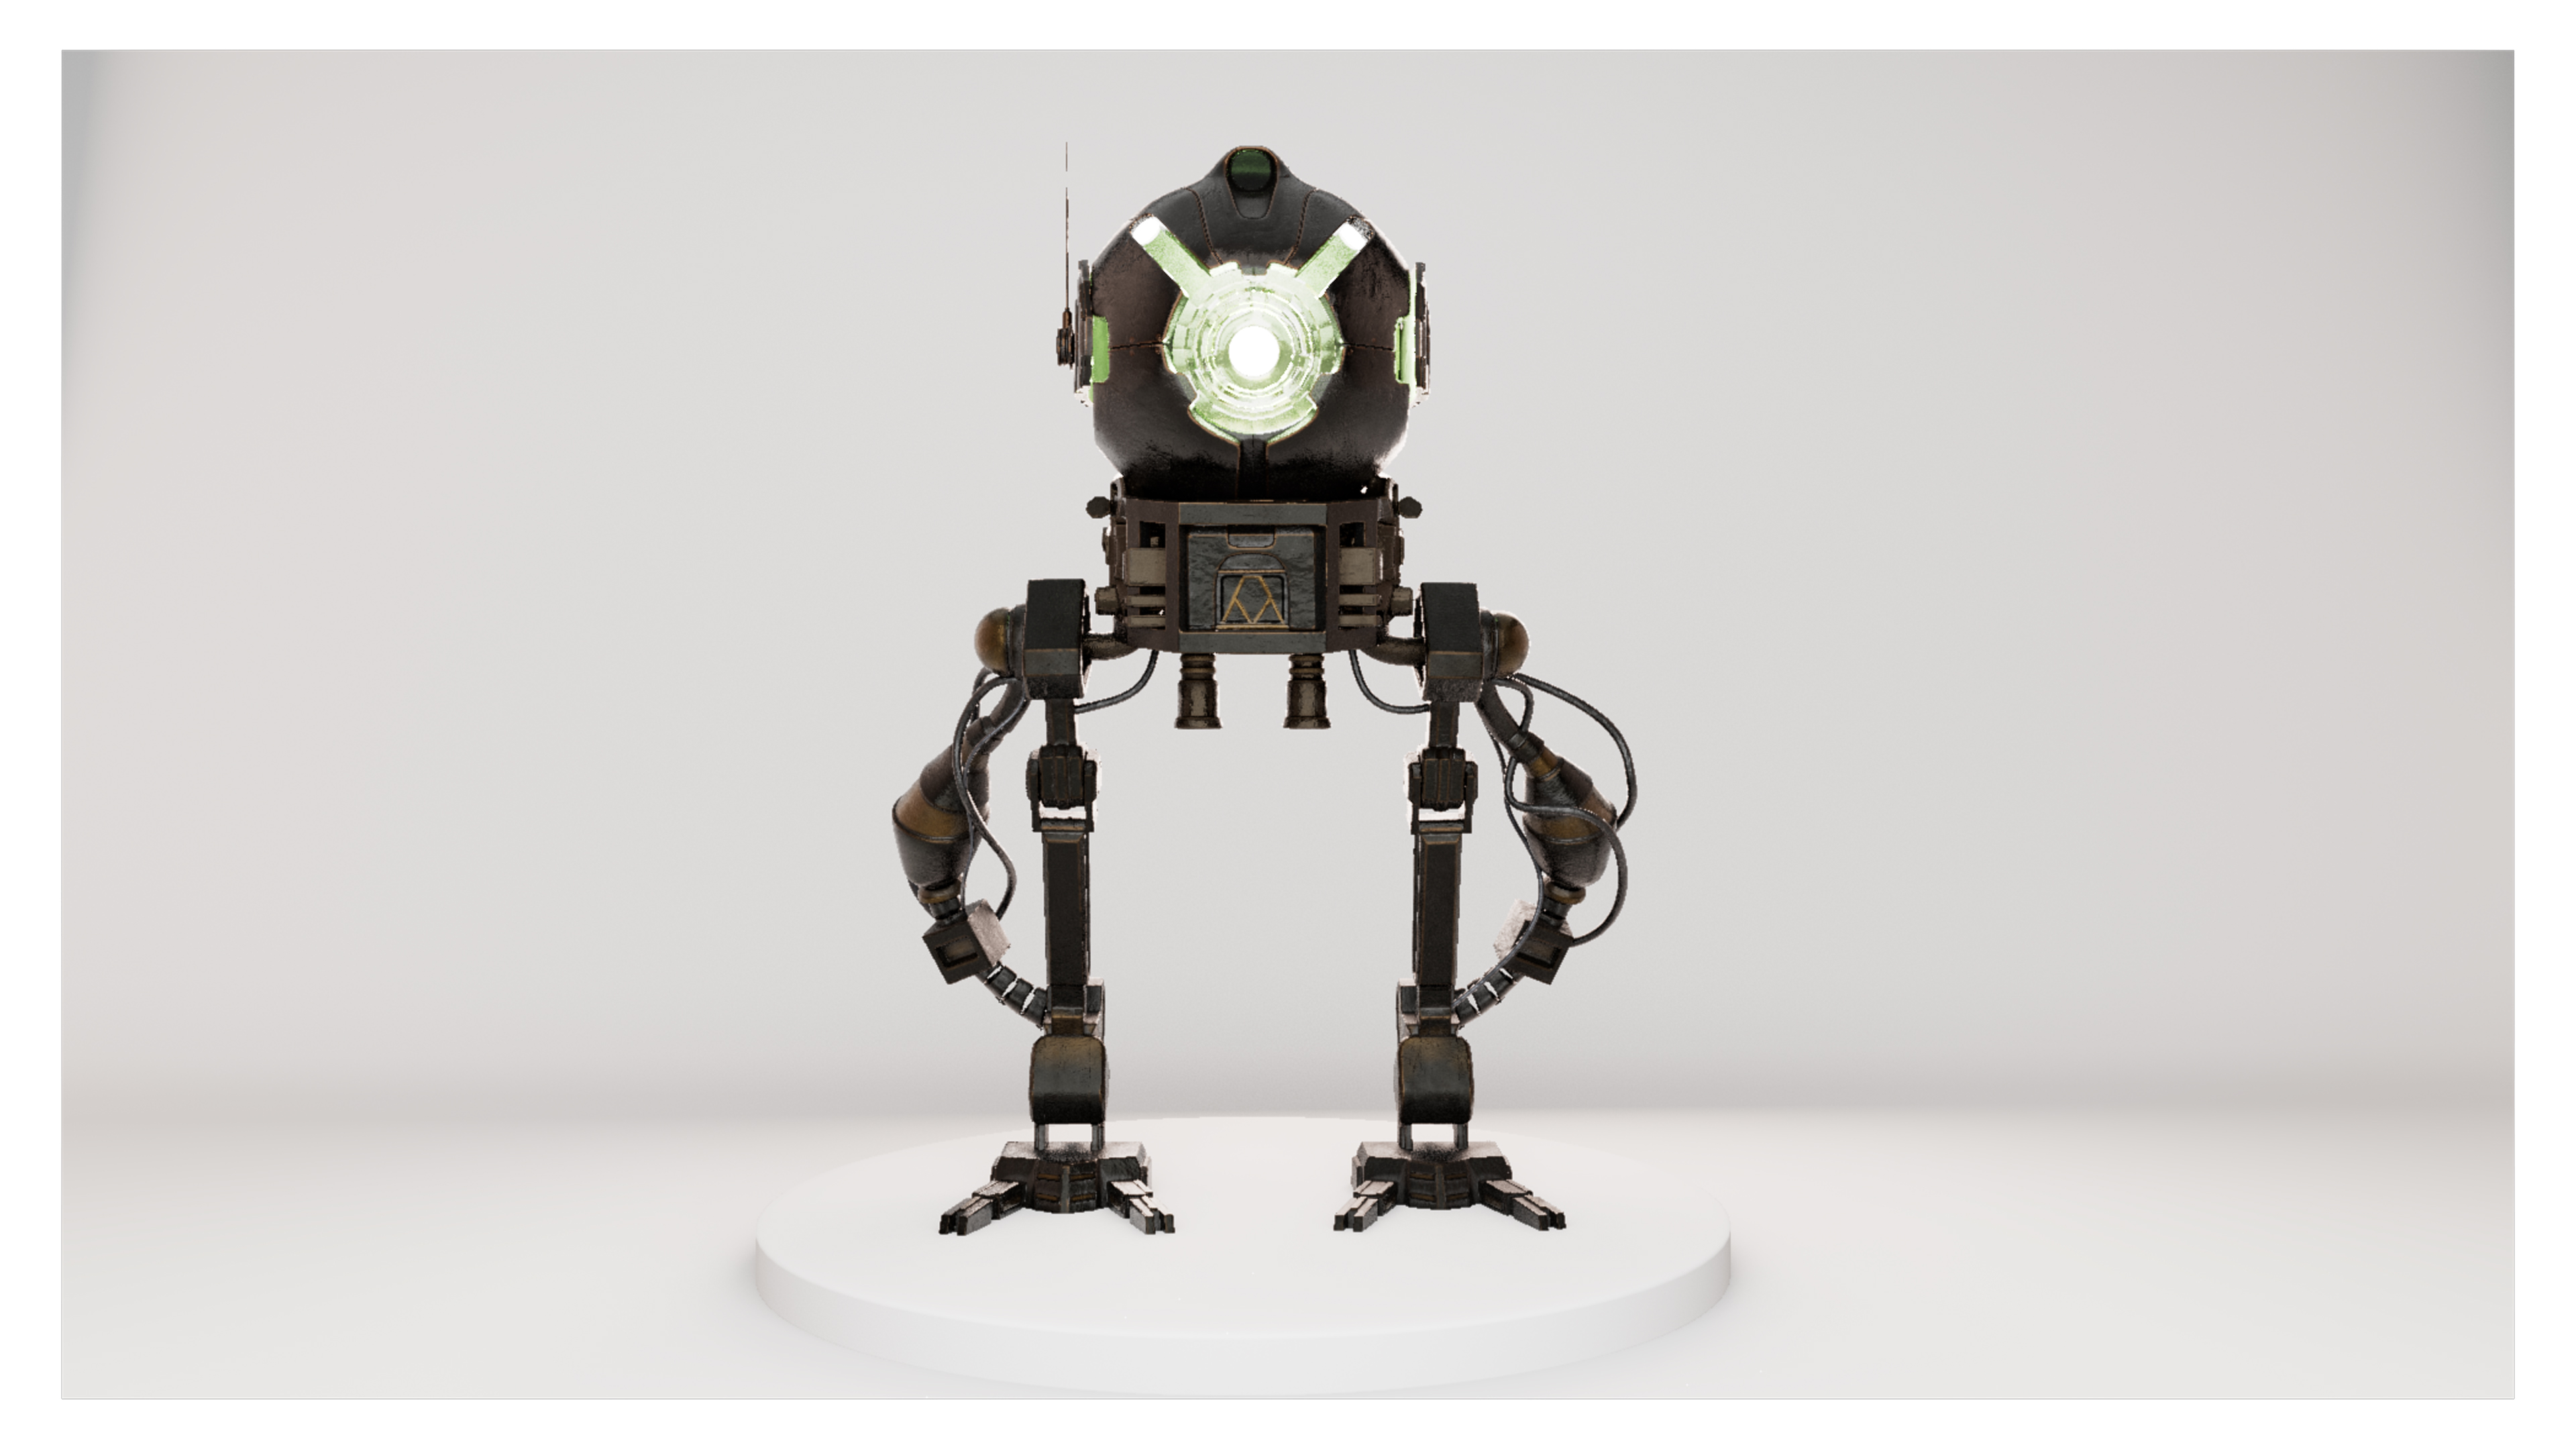 3D turntable of Robot model.